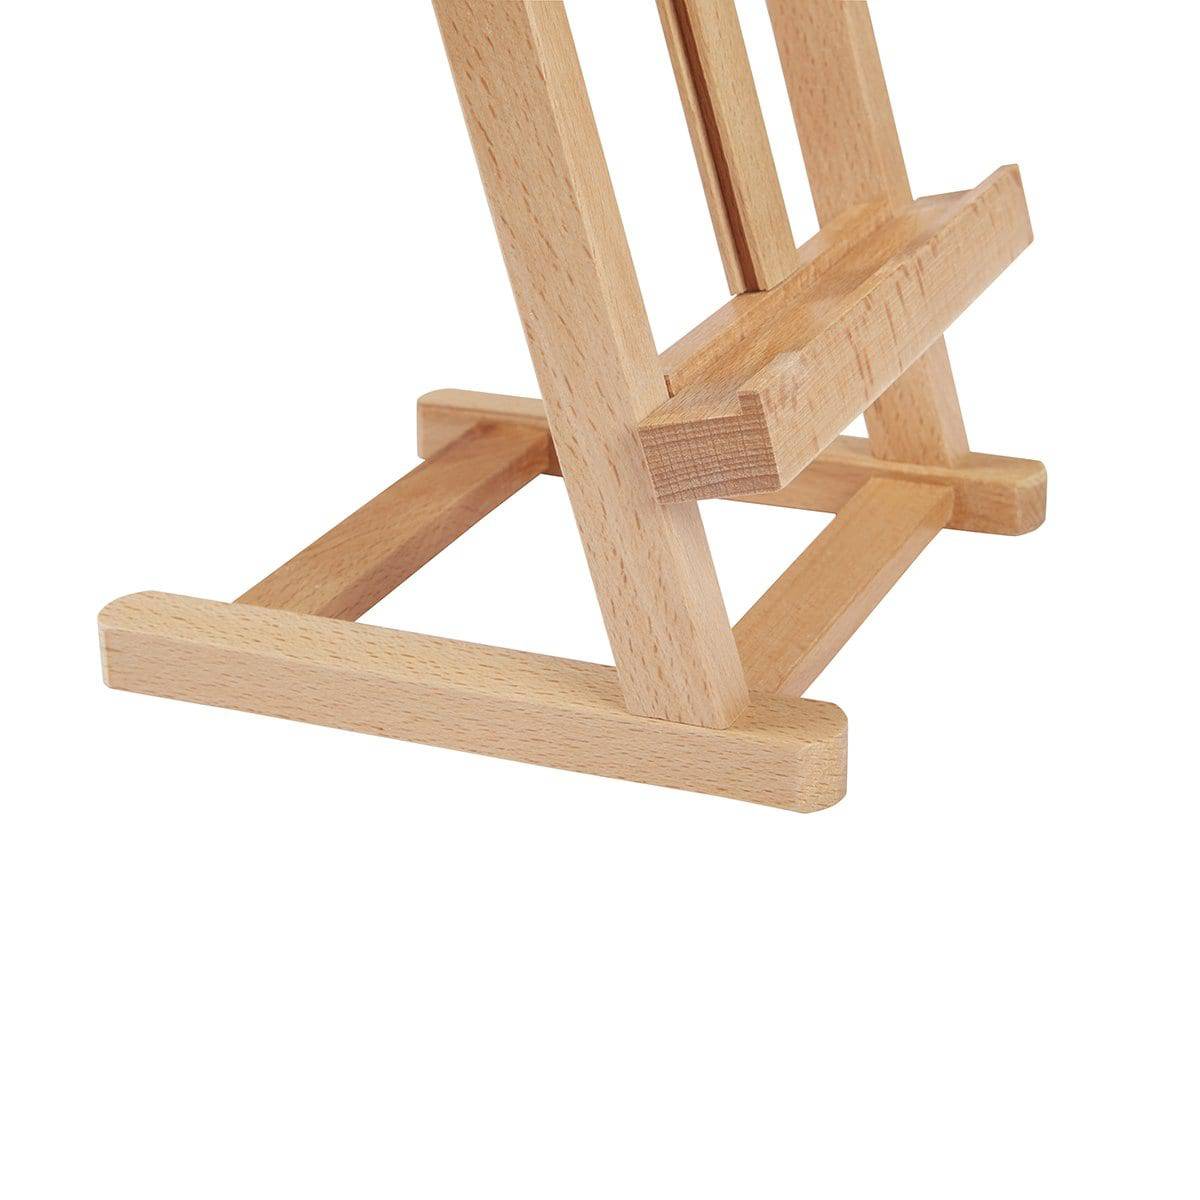  Kinlink 11.8 Inch Tall Wood Easels for Display Set of